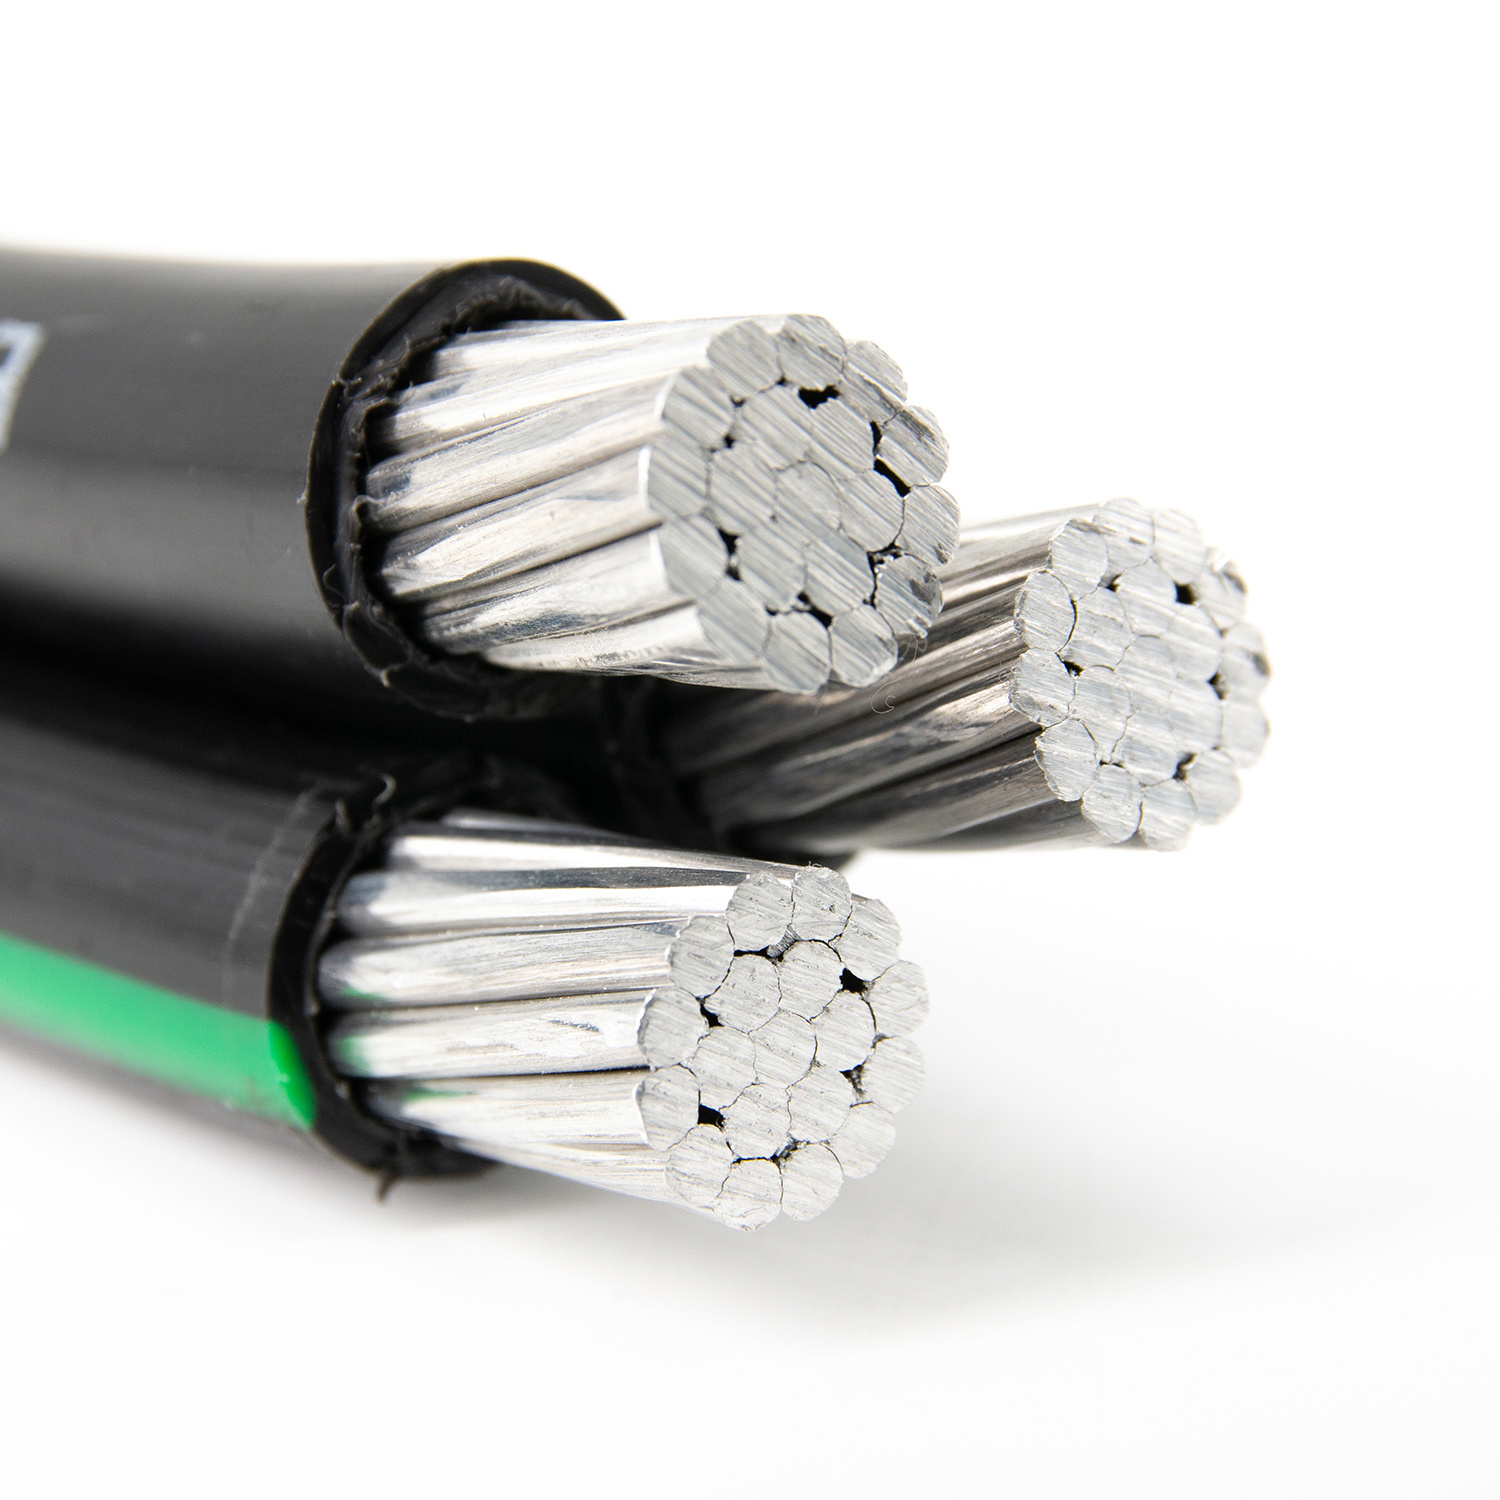 Overhead Stranded Wire AAC/AAAC Conductor XLPE Insulated ABC Cable